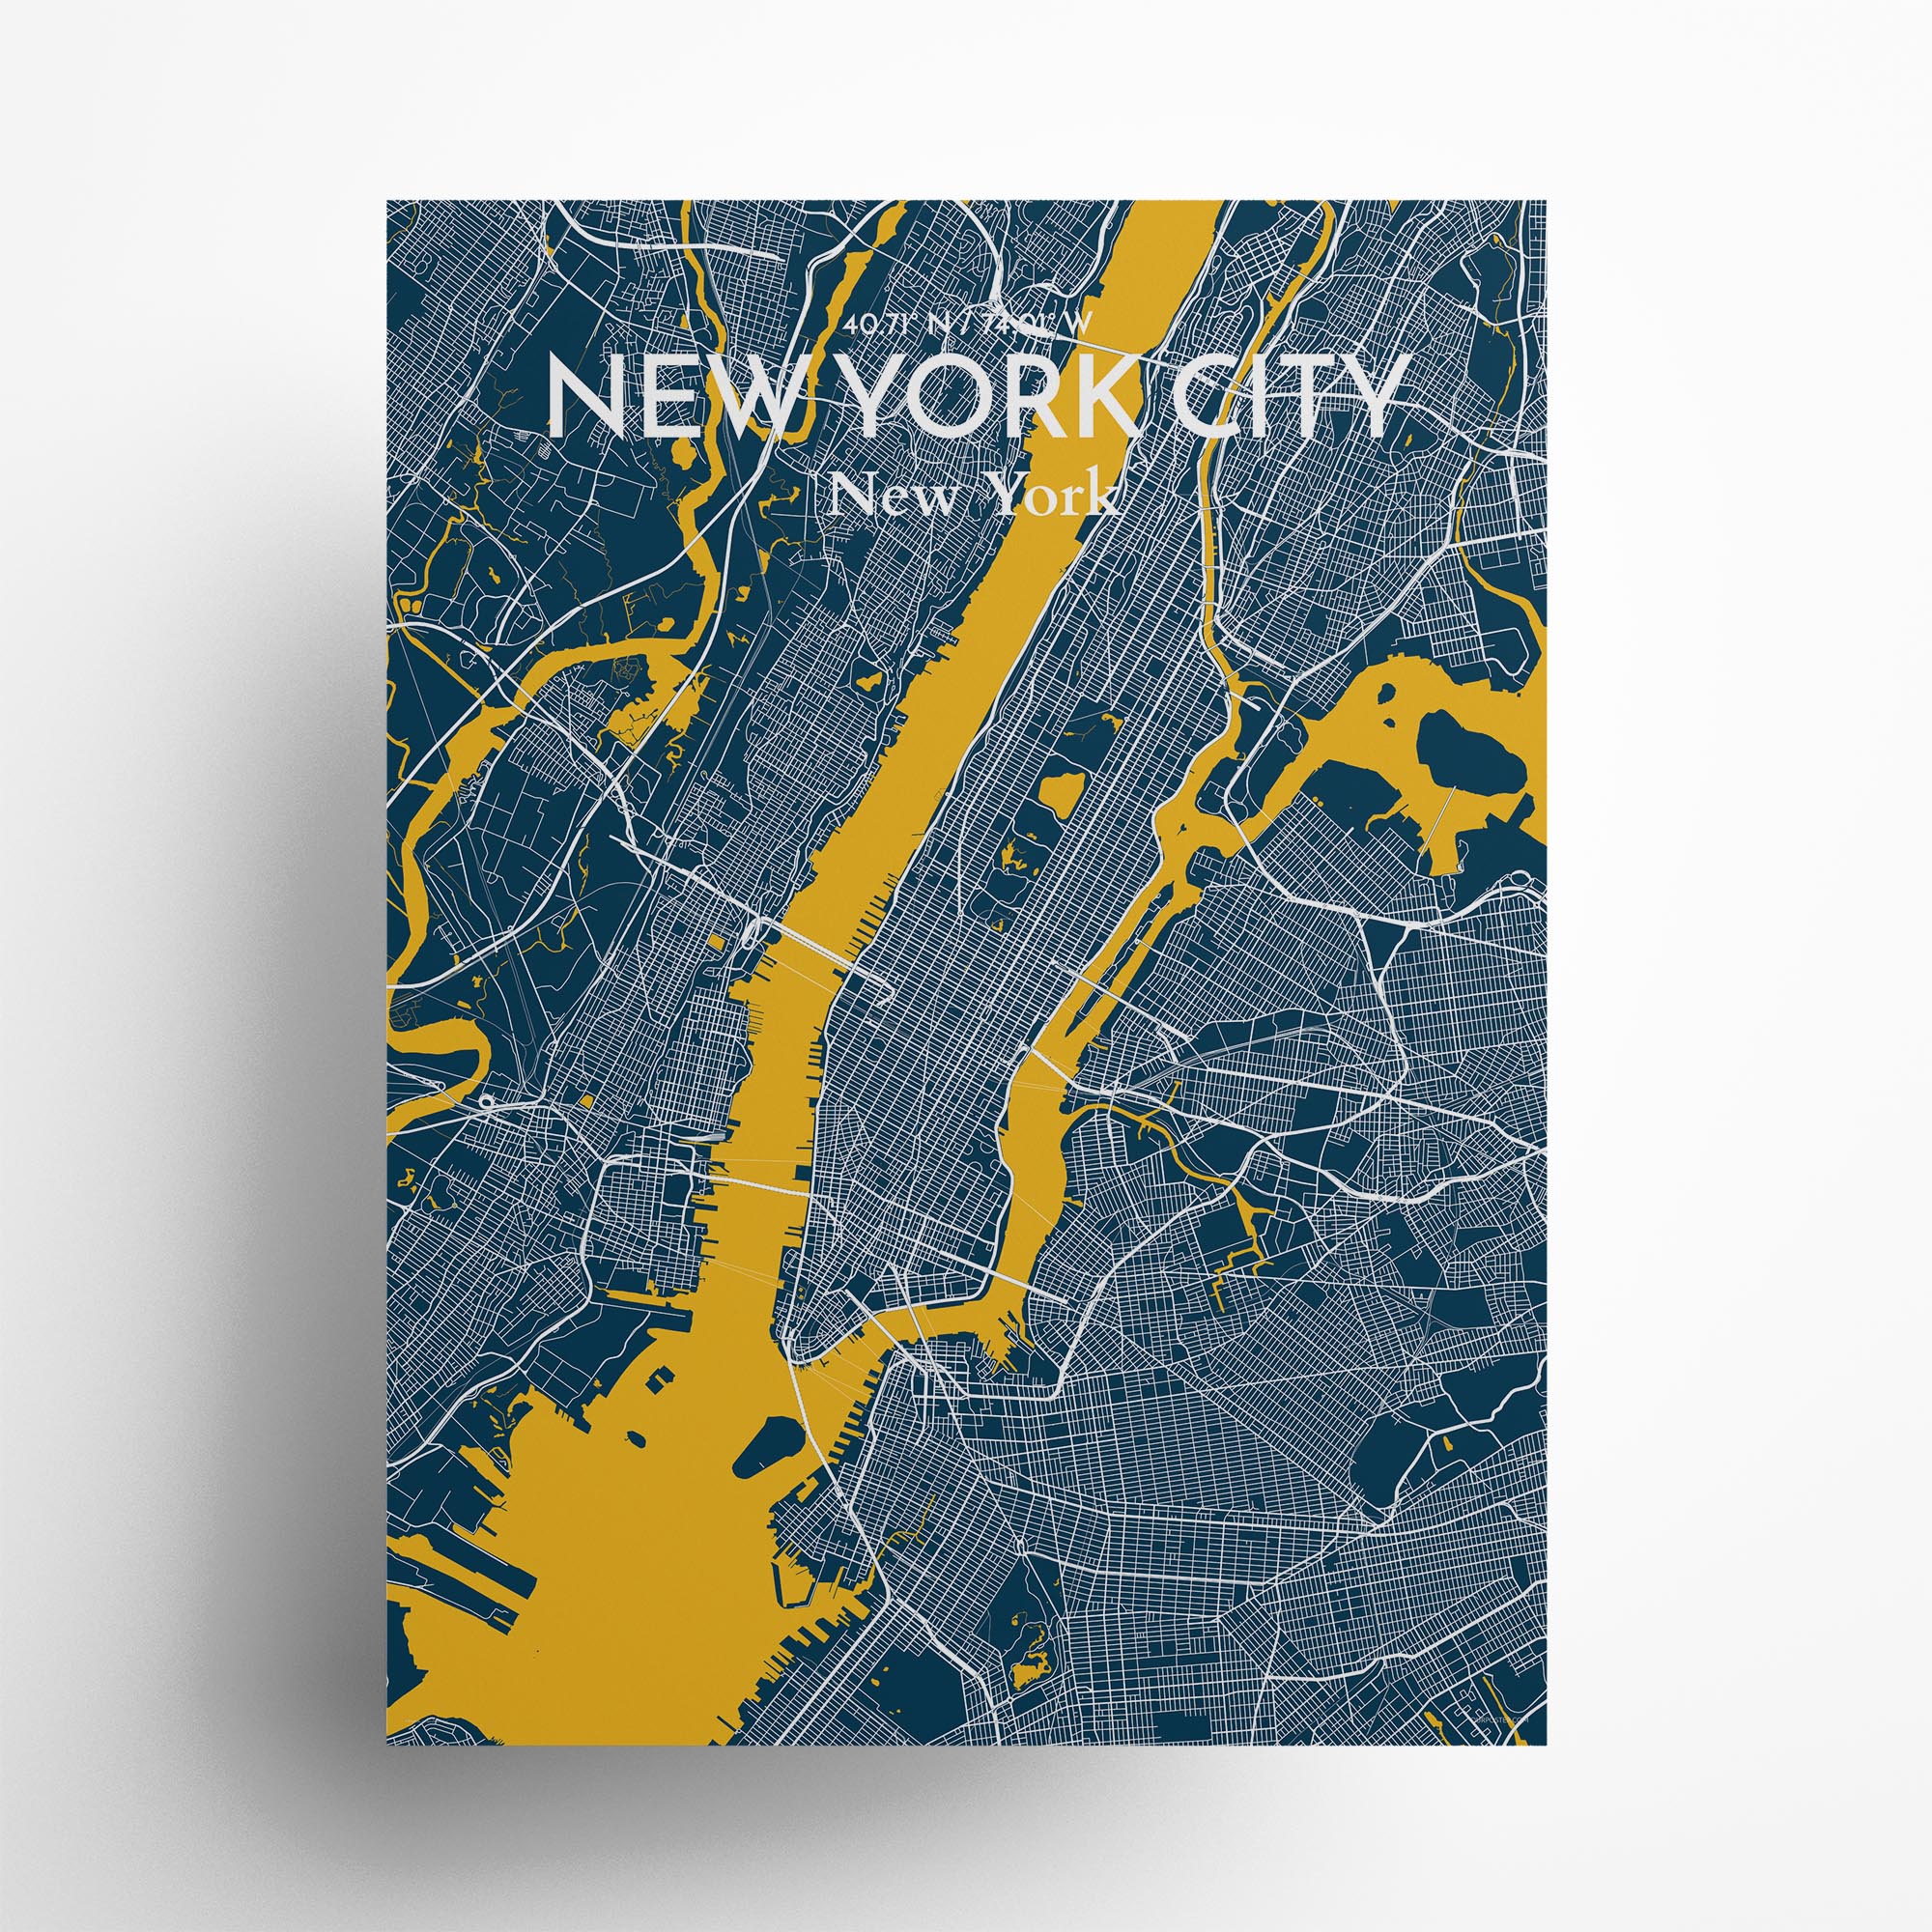 New York City city map poster in Amuse of size 18" x 24"